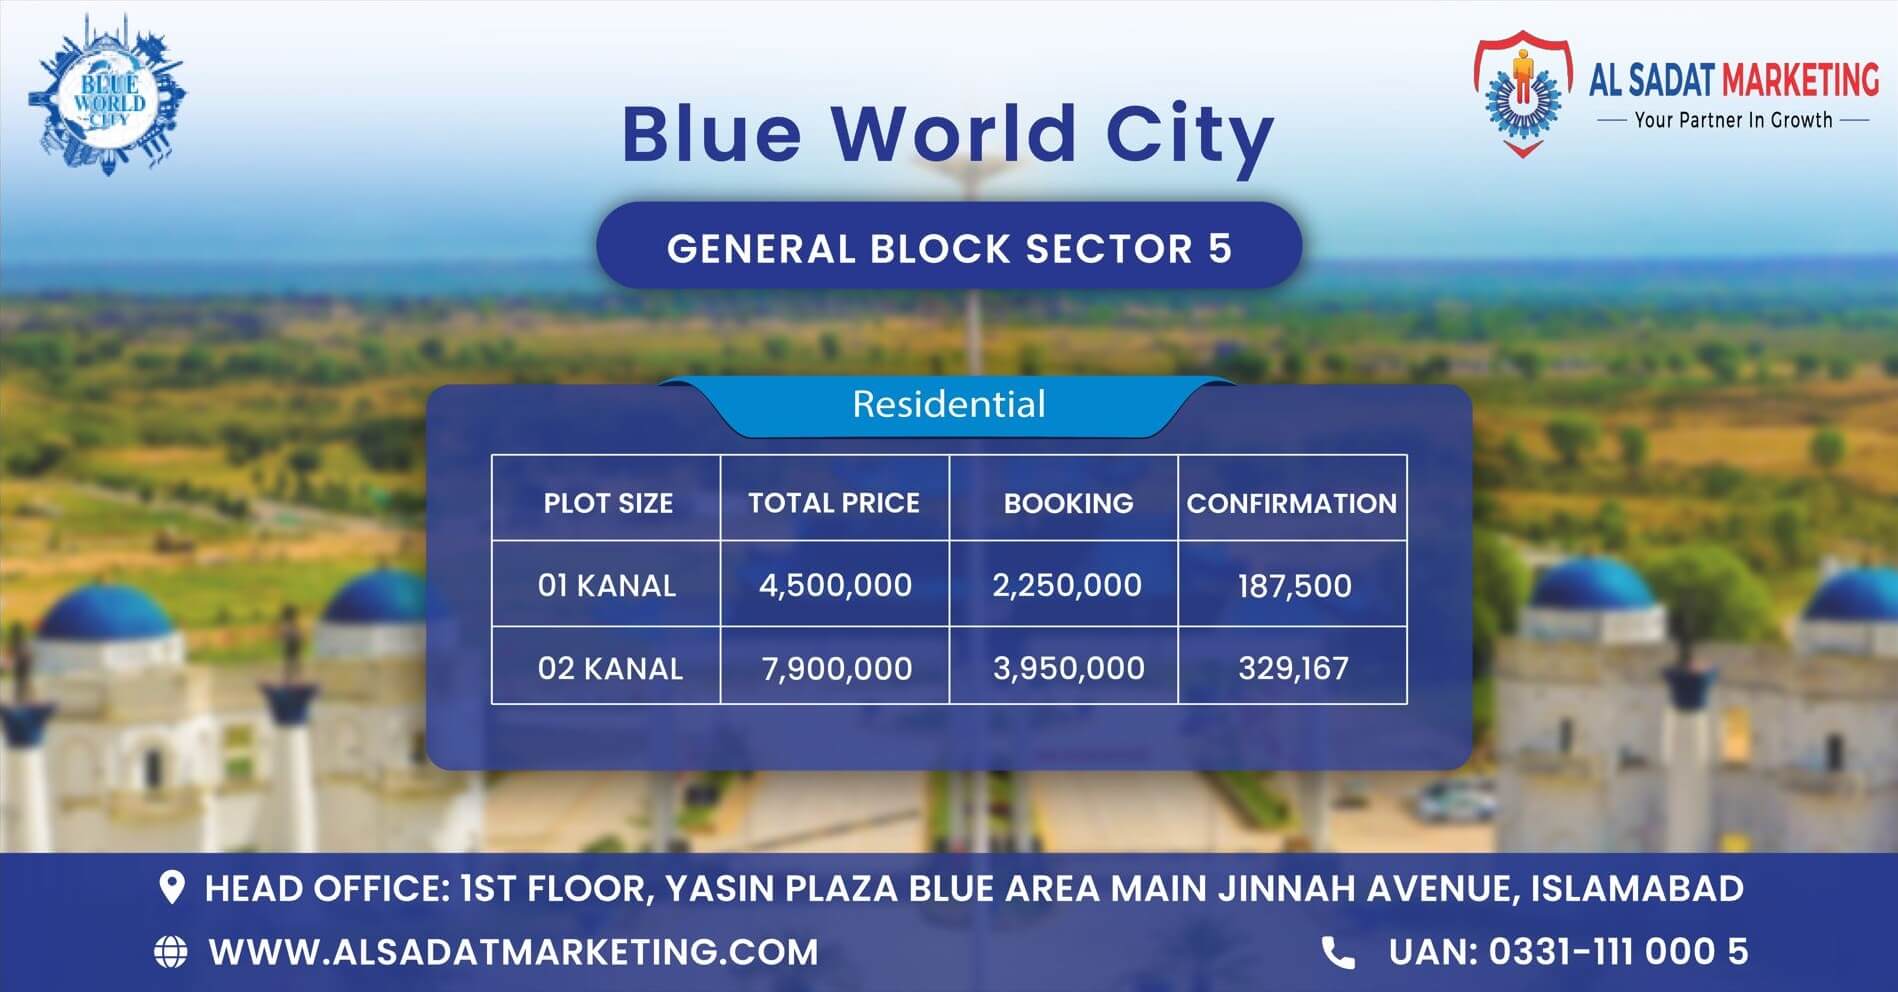 blue world city residential plots payment plan – blue world city islamabad residential plots payment plan – blue world city rawalpindi residential plots payment plan – blue world city general block sector 5 payment plan – blue world city islamabad general block sector 5 payment plan – blue world city rawalpindi general block sector 5 payment plan – blue world city payment plan – blue world city islamabad payment plan - blue world city rawalpindi payment plan – blue world city– blue world city islamabad – blue world city rawalpindi– blue world city housing society – blue world city islamabad housing society – blue world city real estate project – blue world city islamabad real estate project - al sadat marketing - alsadat marketing - al-sadat marketing